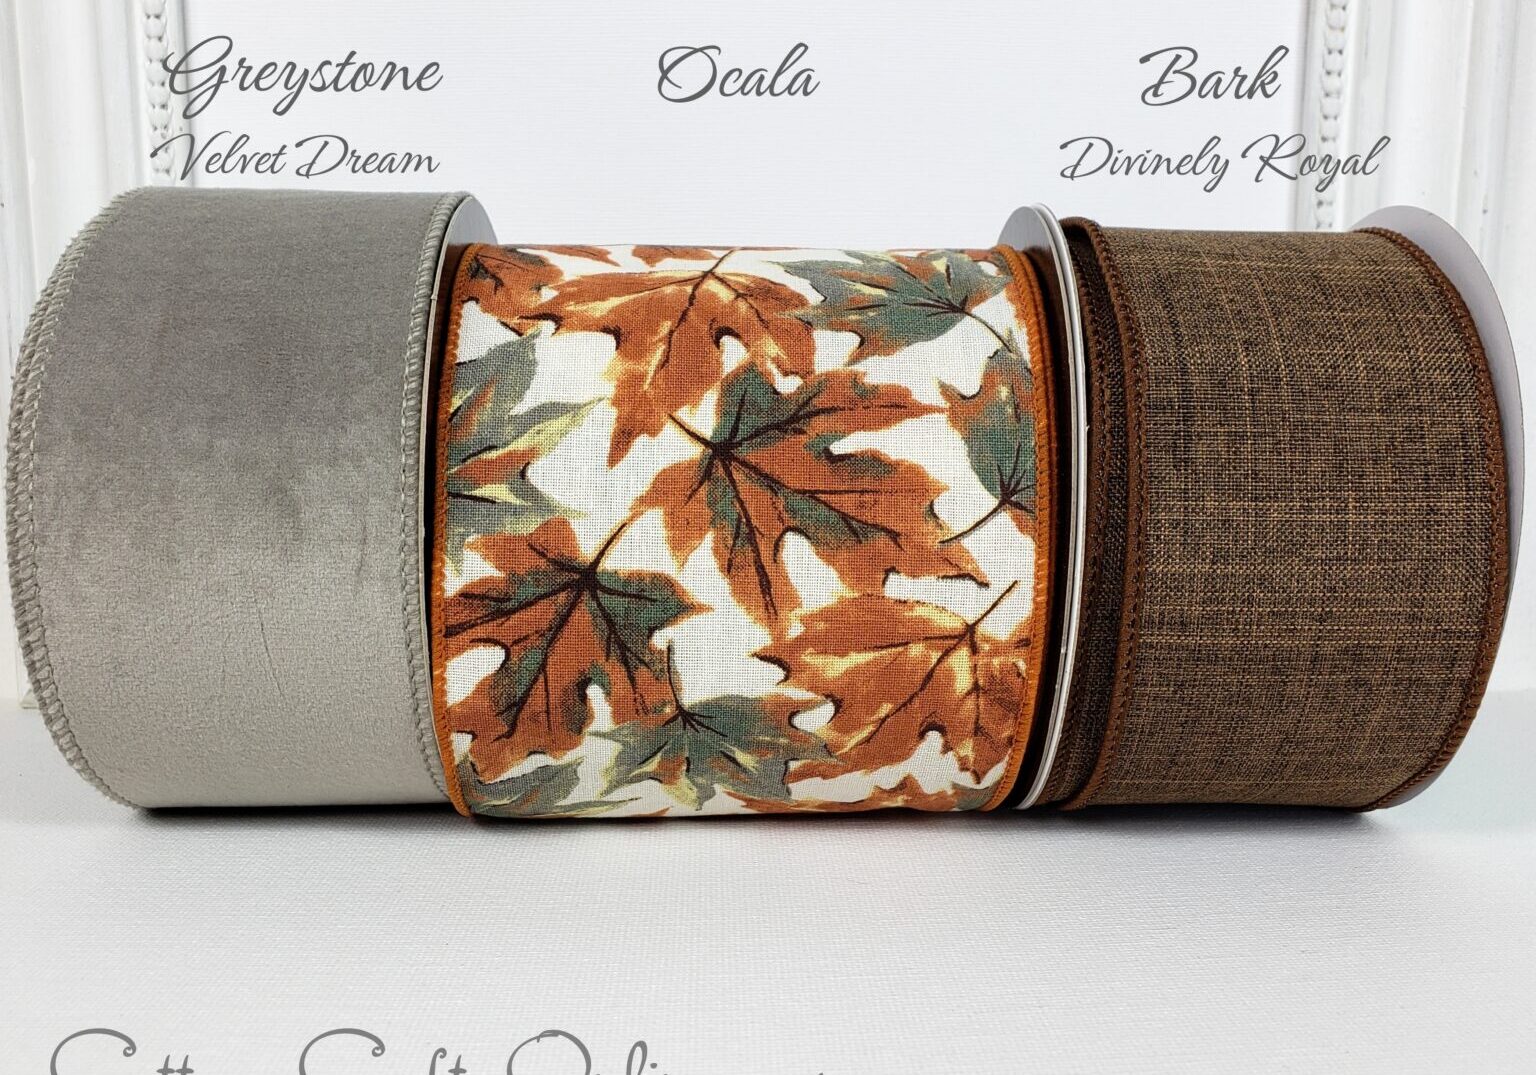 A side by side rolls of ribbons for Fall